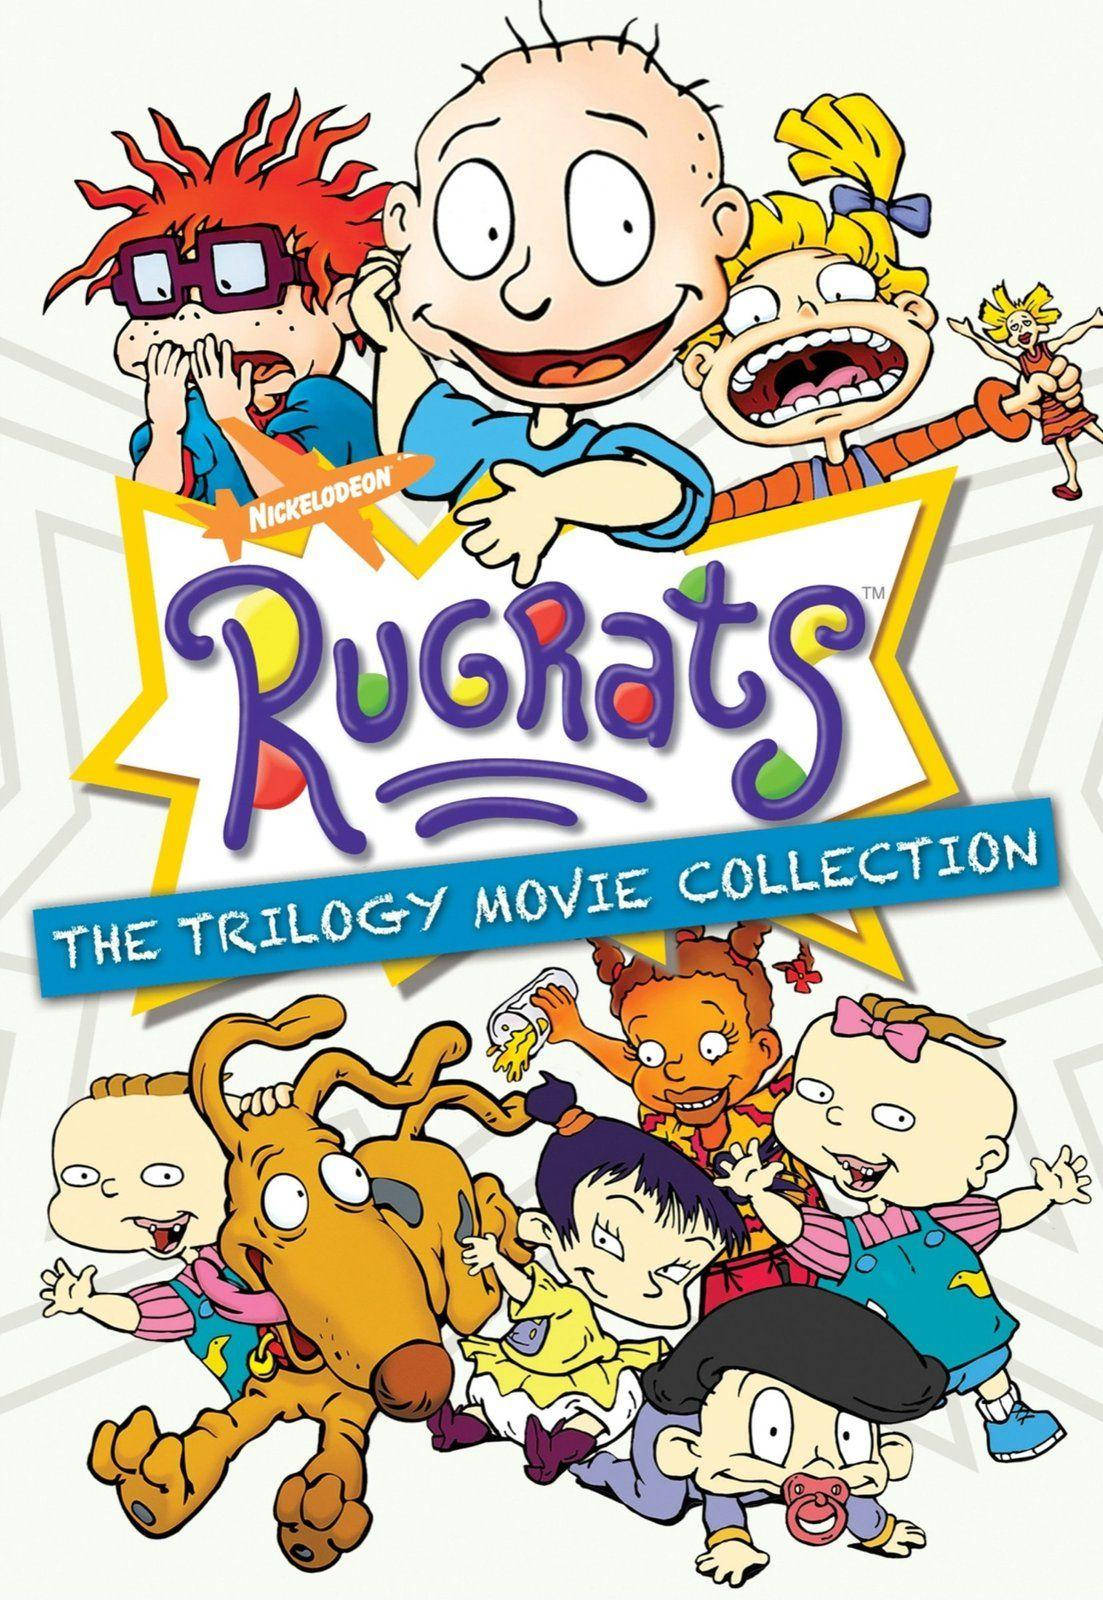 Rufats The Trilogy Movie Collection Wallpaper